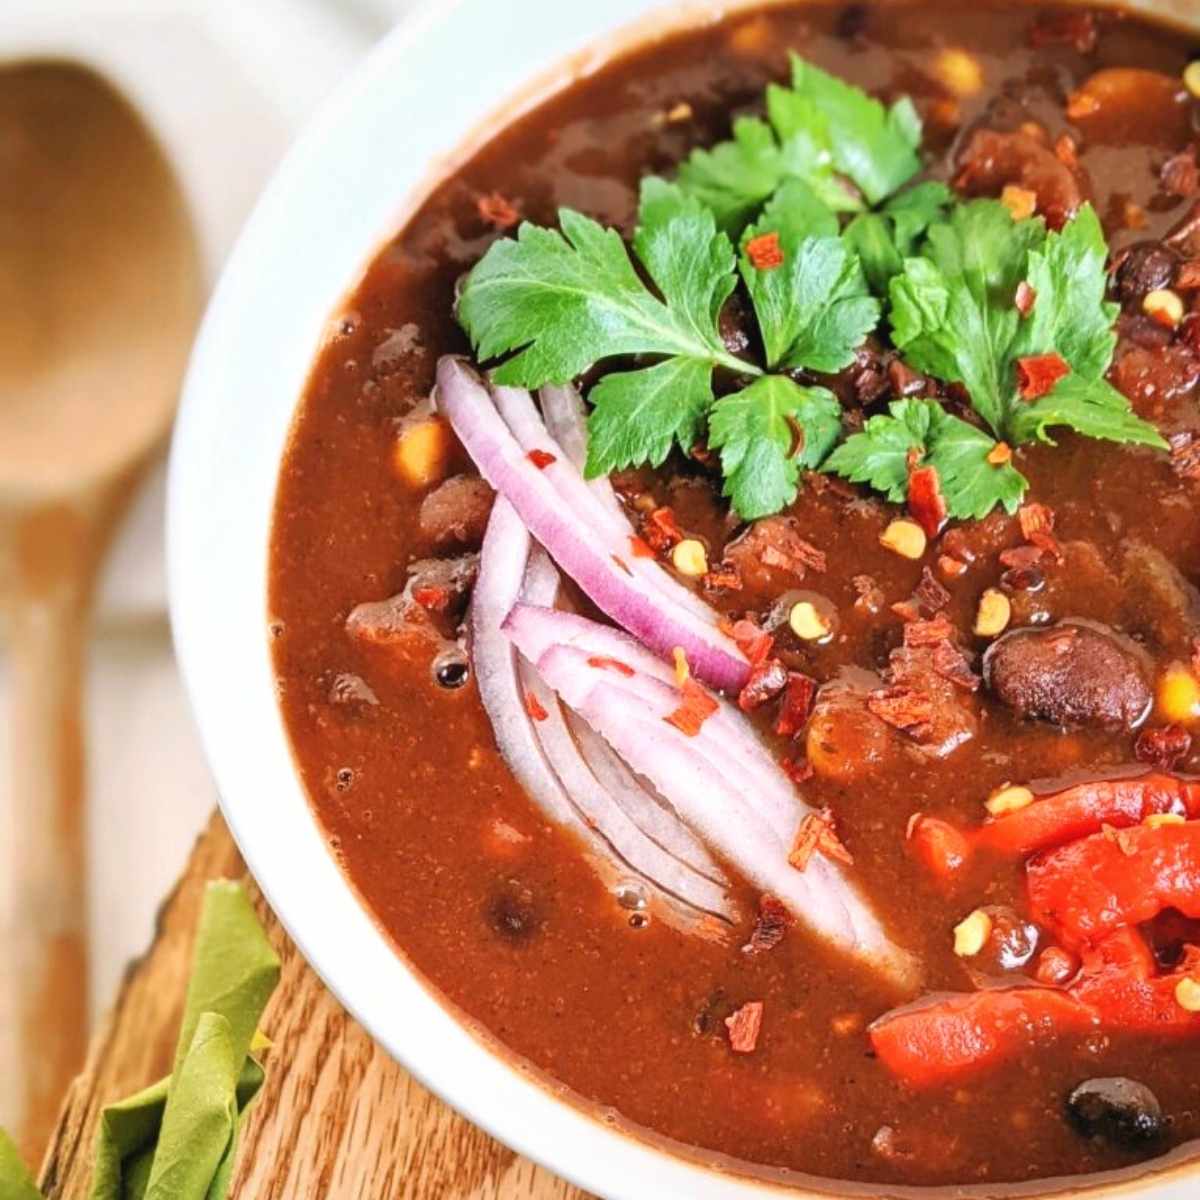 beyond meat chili with black beans pinto beans kidney beans recipe vegan gluten free vegetarian meatless veganuary chili recipes healthy slow cooker crock pot instant pot pressure cooker chilis